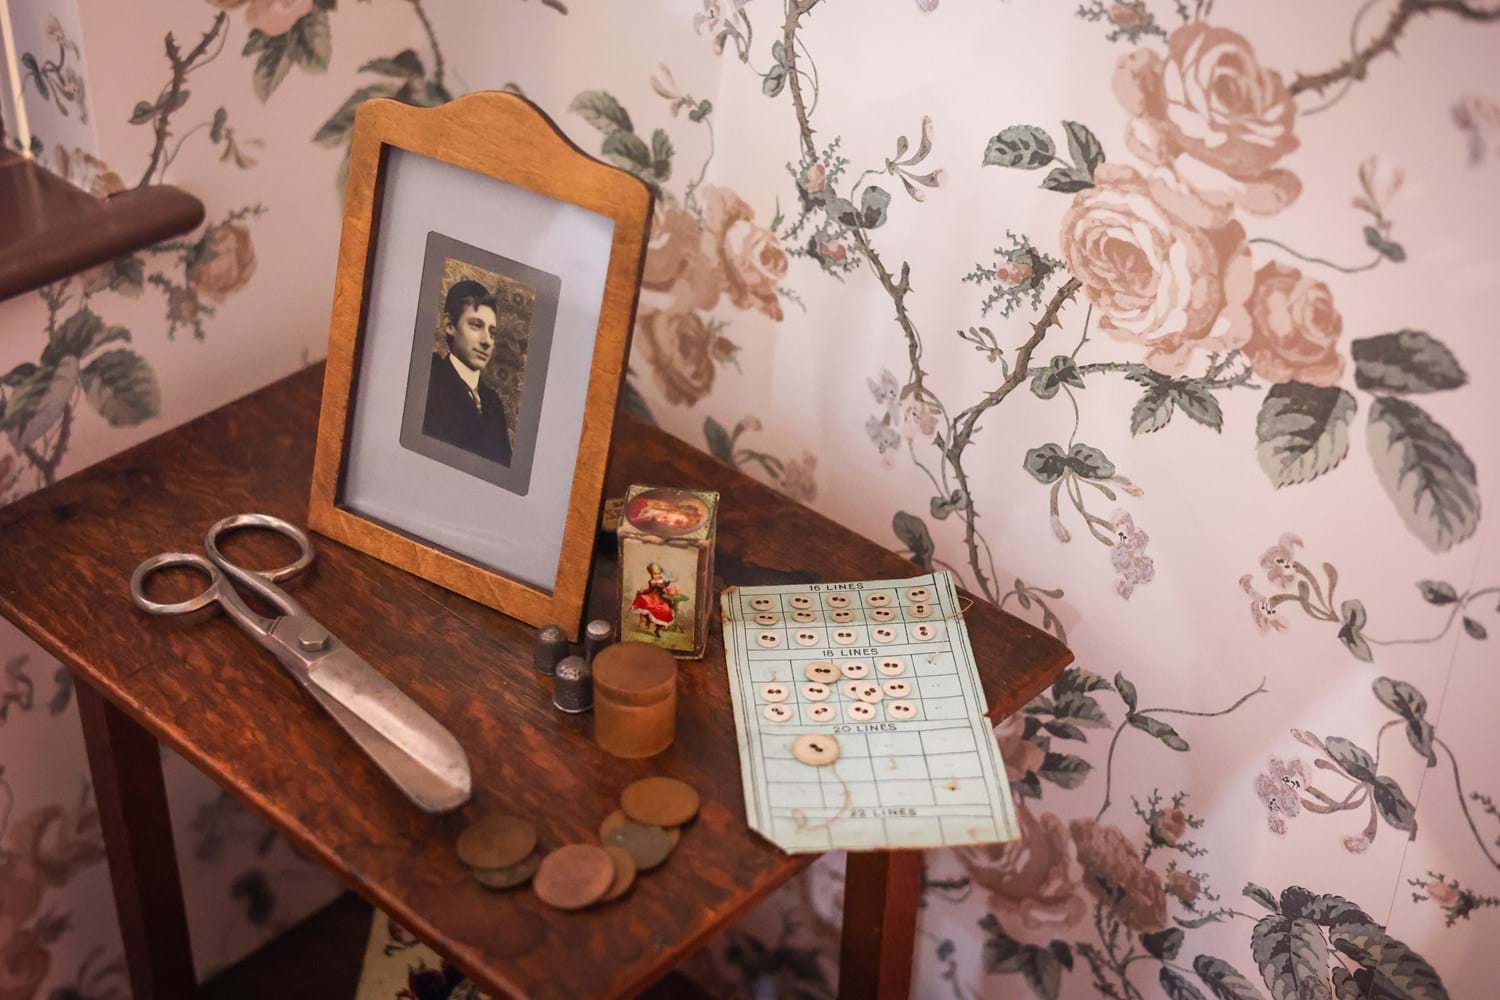 A wooden bookshelf against a wall with pink rose patterned wallpaper. Atop the shelf is a framed photo of a person in the 1910s, buttons, and sewing scissors